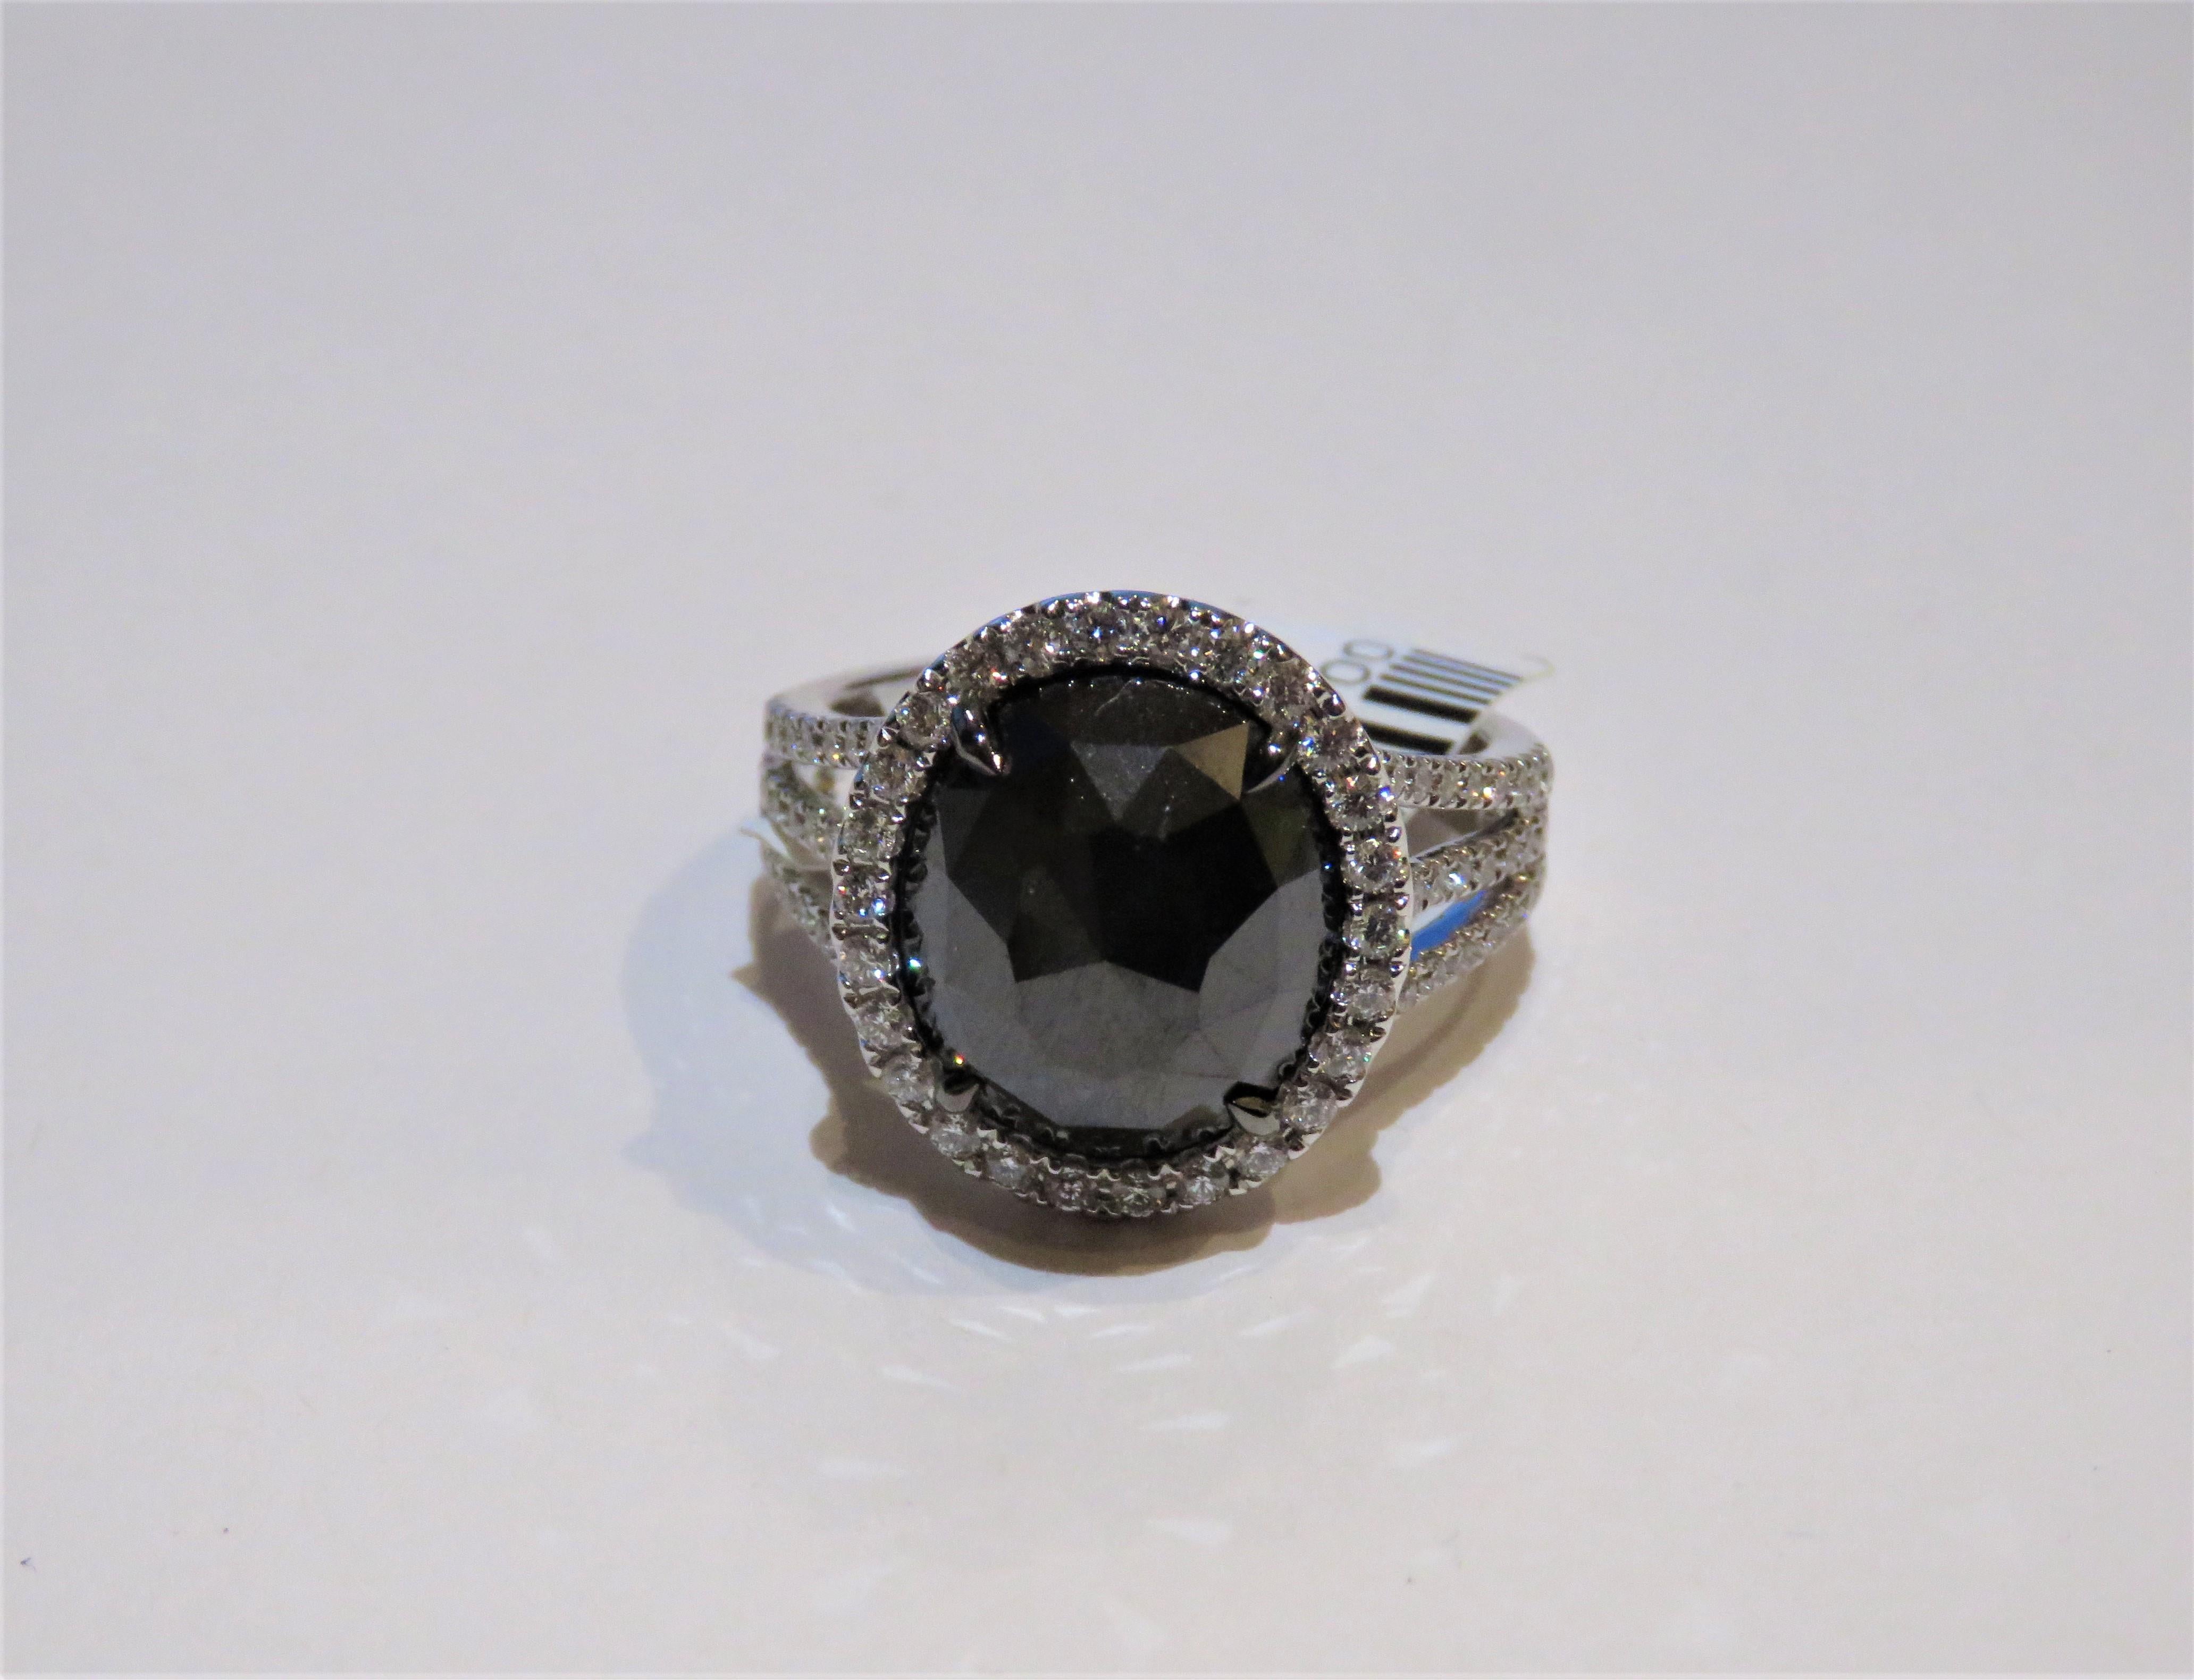 The Following Item we are offering is this Extremely Rare Beautiful 18KT Gold Fine Rare Large Fancy Black Diamond Ring. This Magnificent Ring is comprised of Rare Fine Large Faceted Oval Black Diamond surrounded with a Halo of Diamonds and 3 rows of